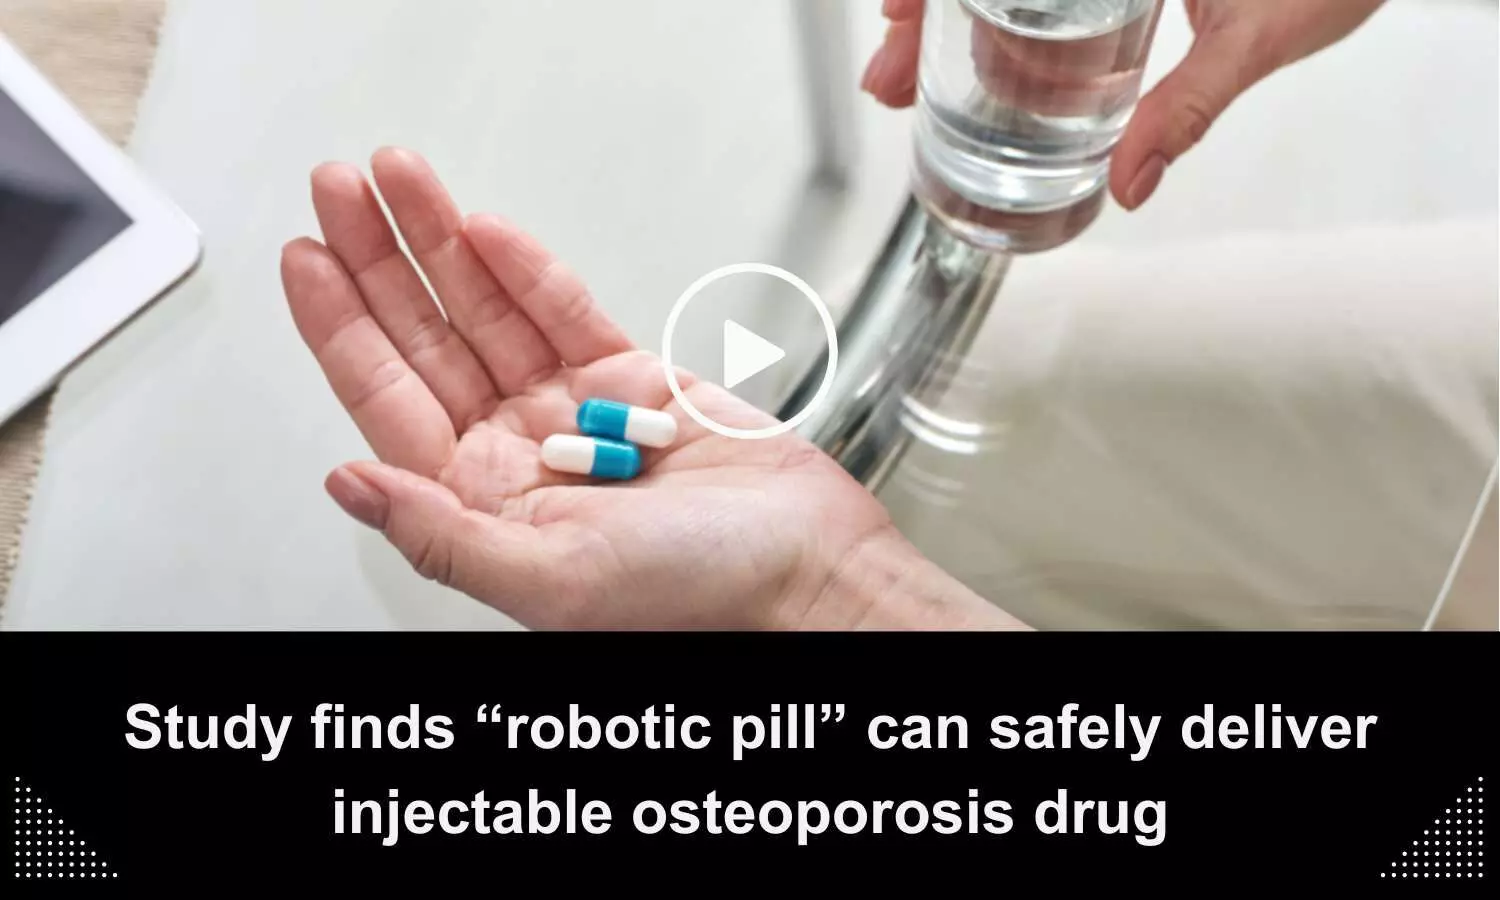 Robotic Pill can safely deliver injectable osteoporosis drug, finds study